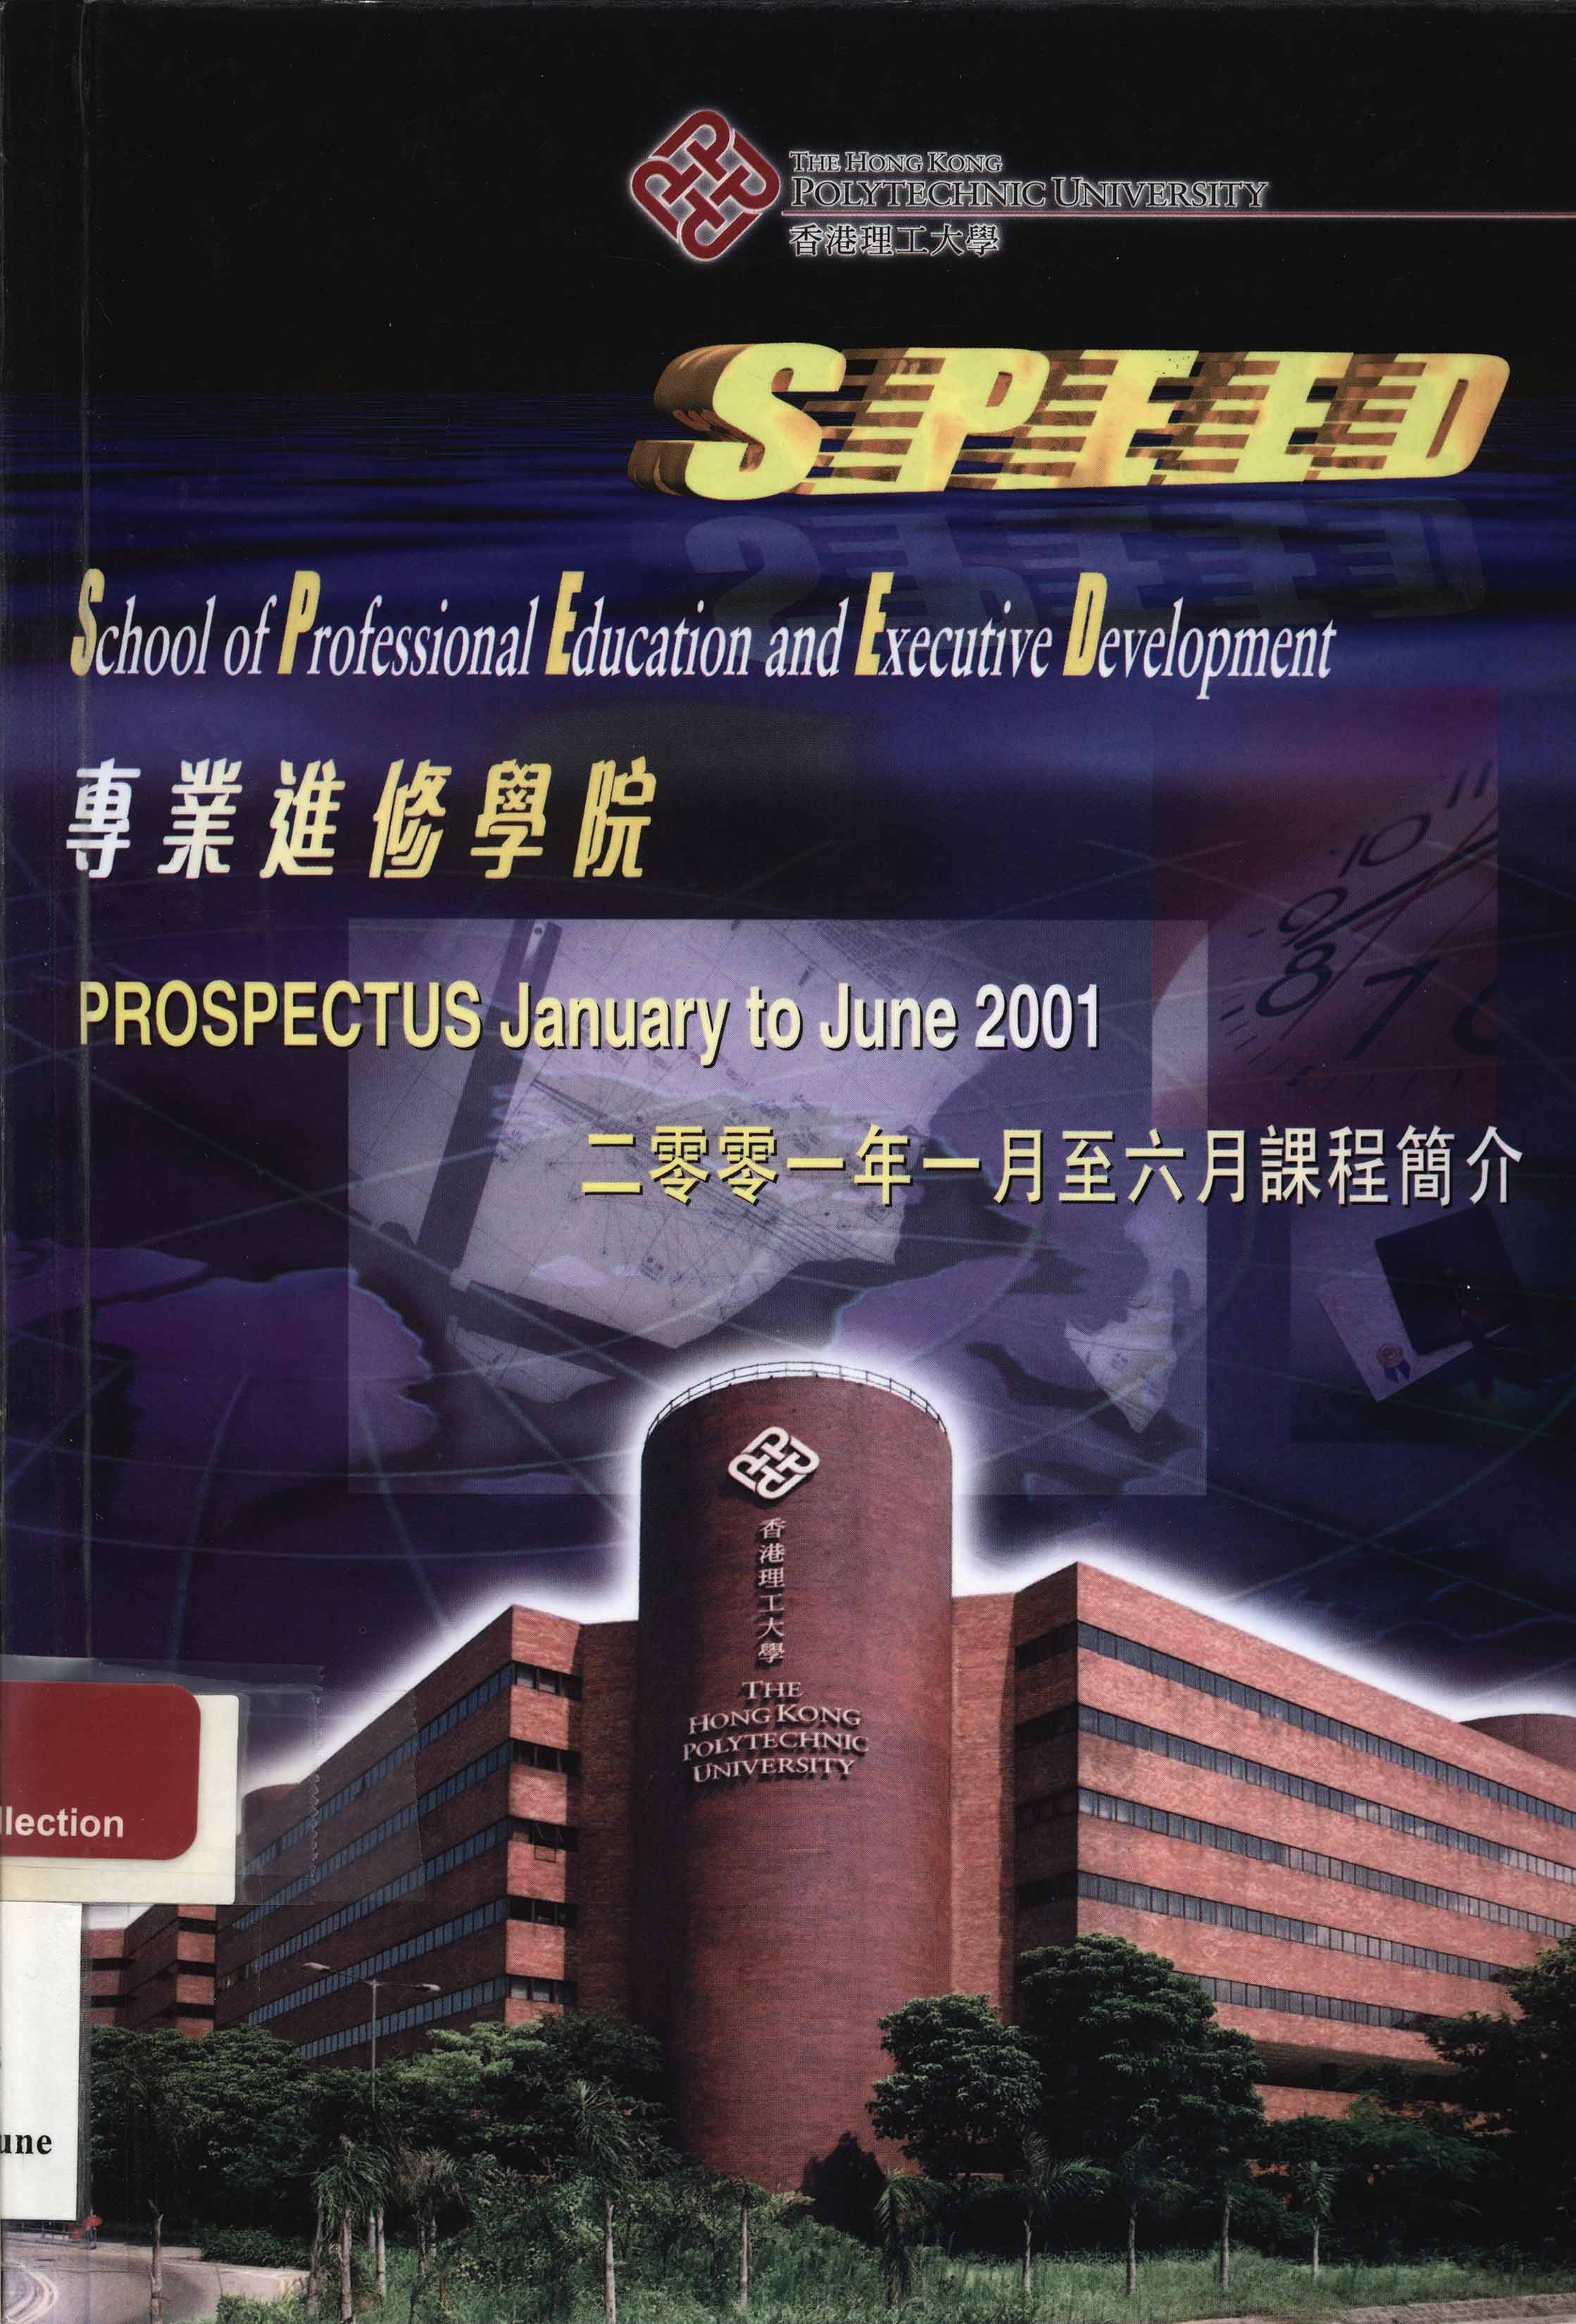 Prospectus [School of Professional Education and Executive Development (SPEED) - Jan to June 2001]